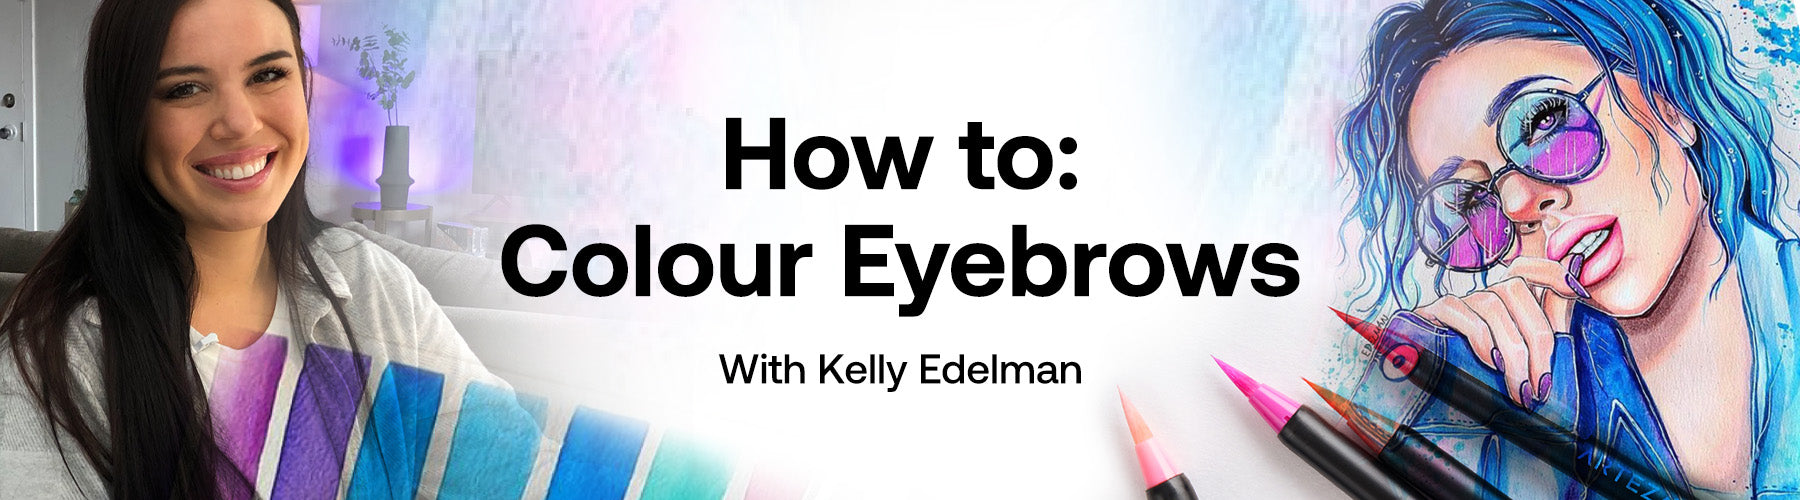 How to: Colour Eyebrows with Kelly Edelman